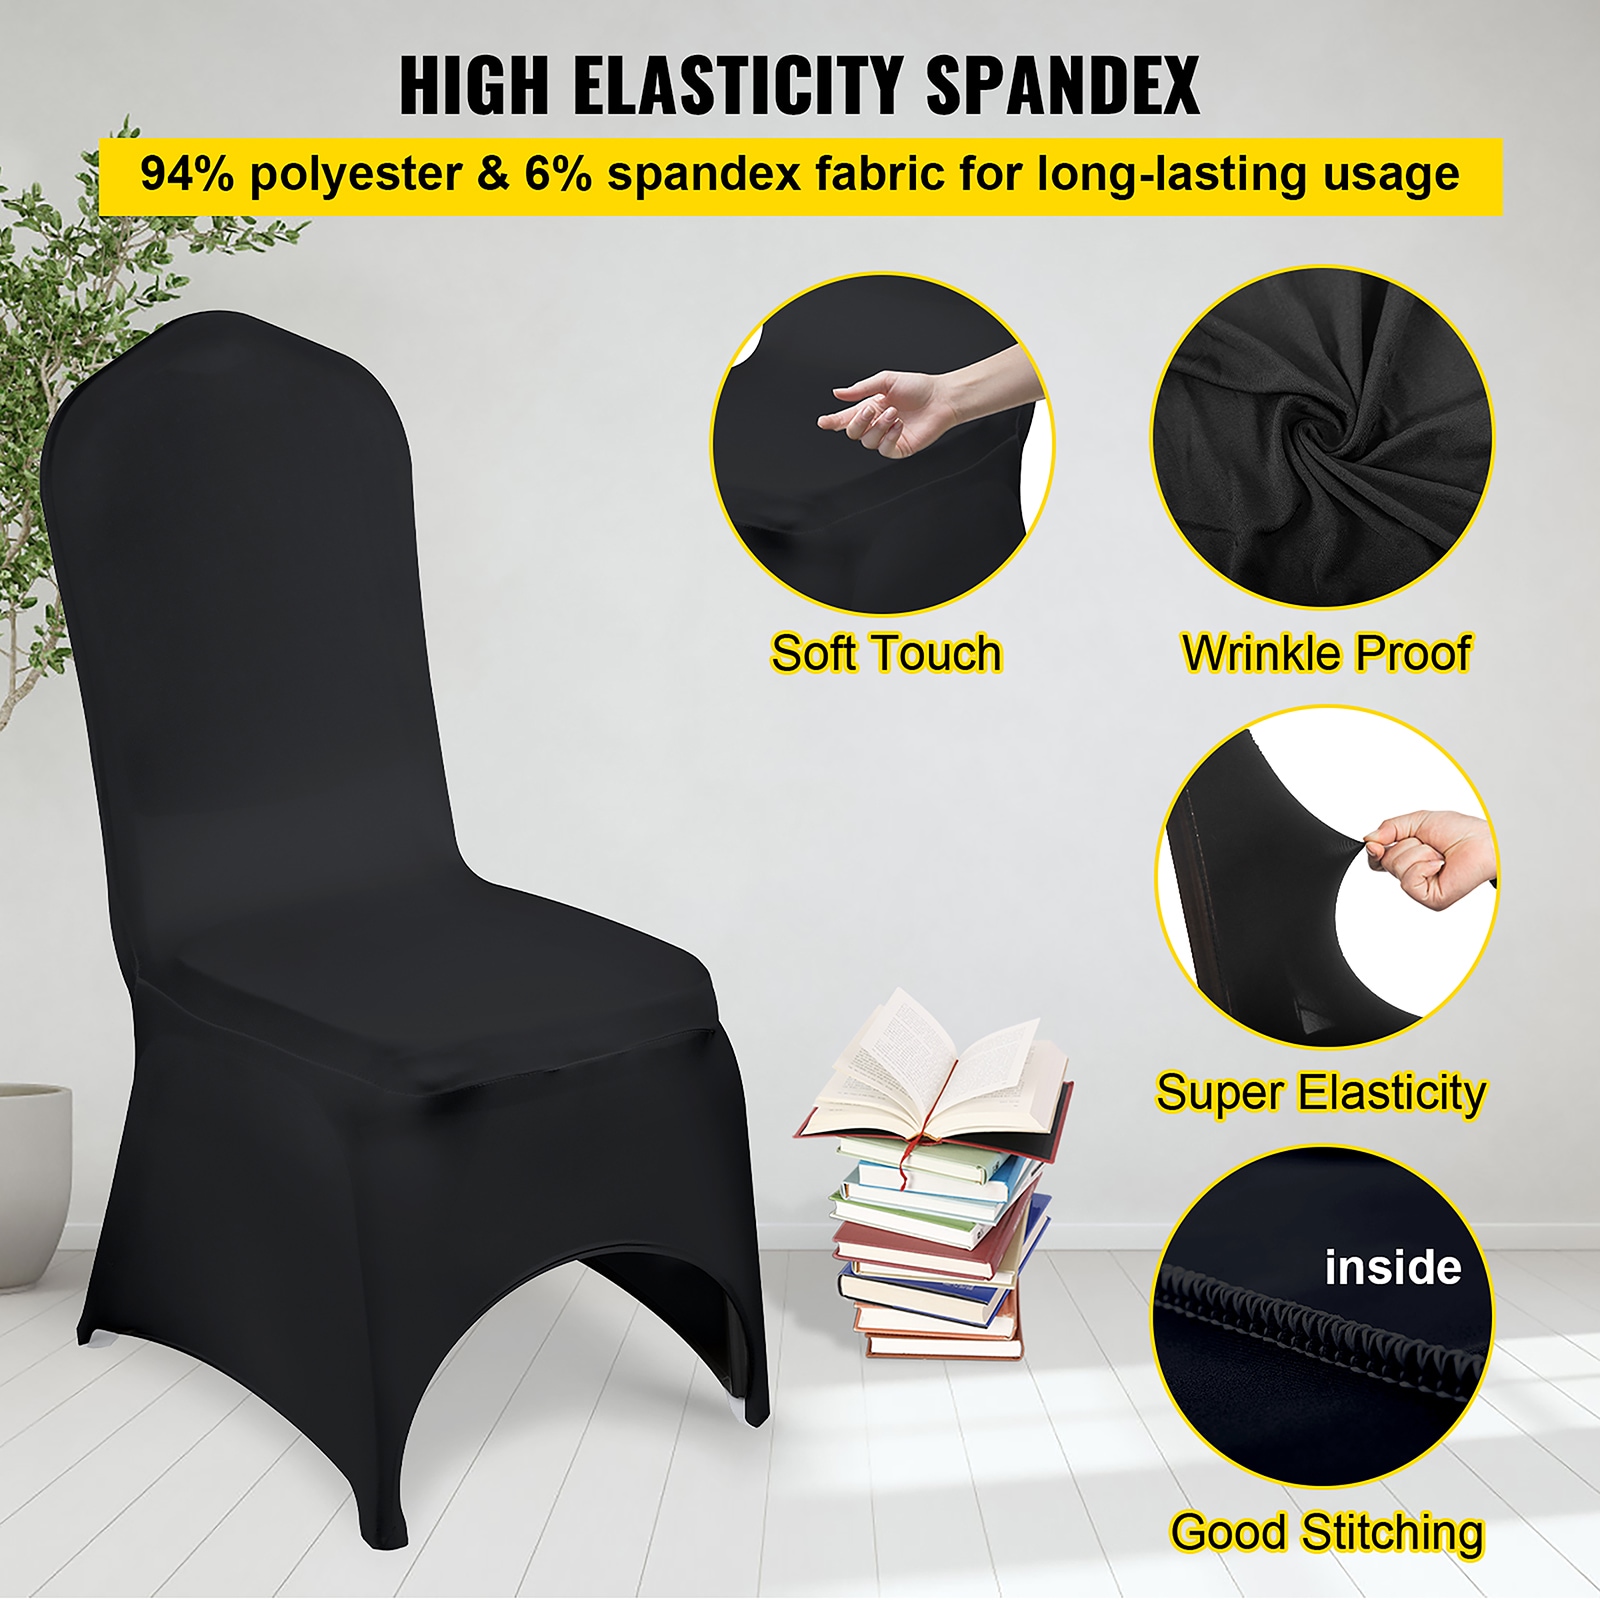 WELMATCH Black Spandex Folding Chair Covers - 50 PCS Weddding Events Party  Decoration Stretch Elastic Chair Covers Good (Black, 50)